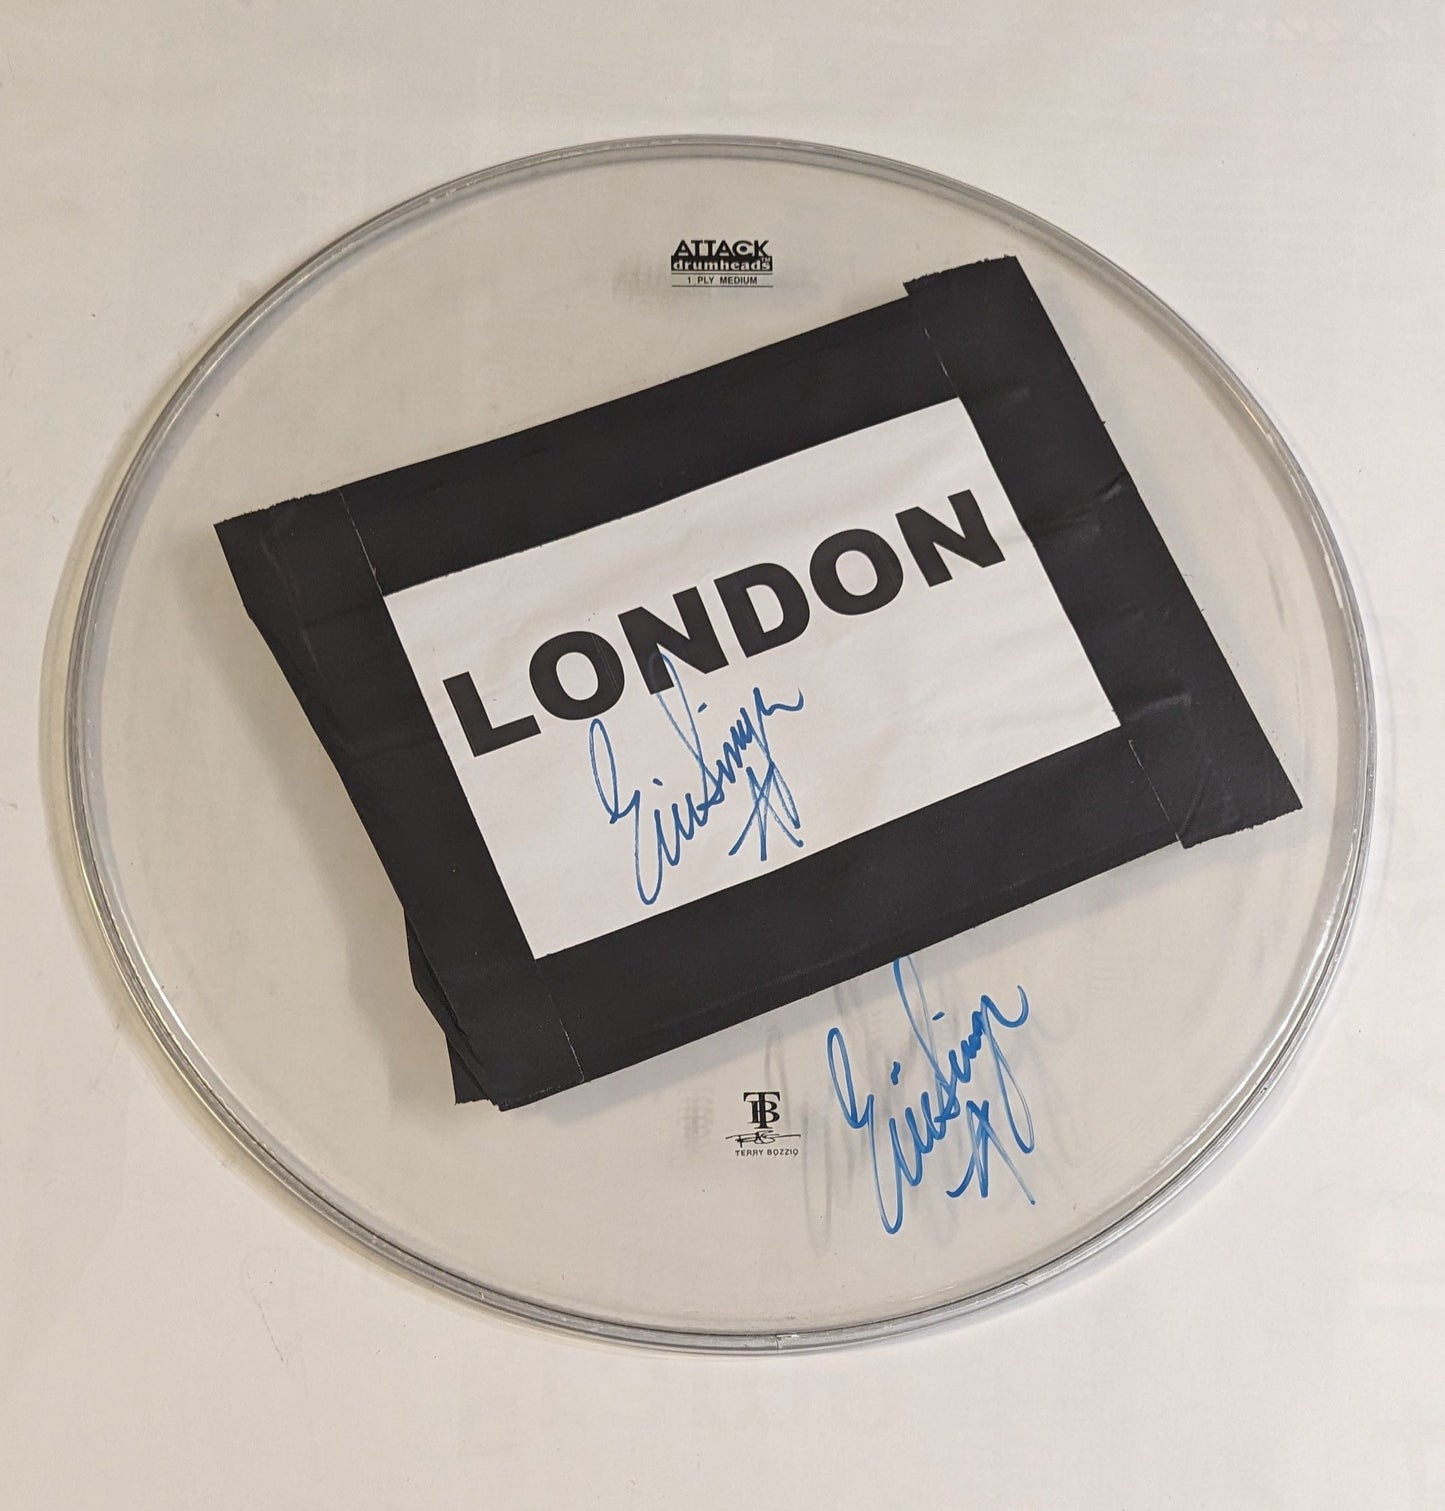 KISS LONDON 7-4-2012  ERIC SINGER Stage-Used Signed drumheads